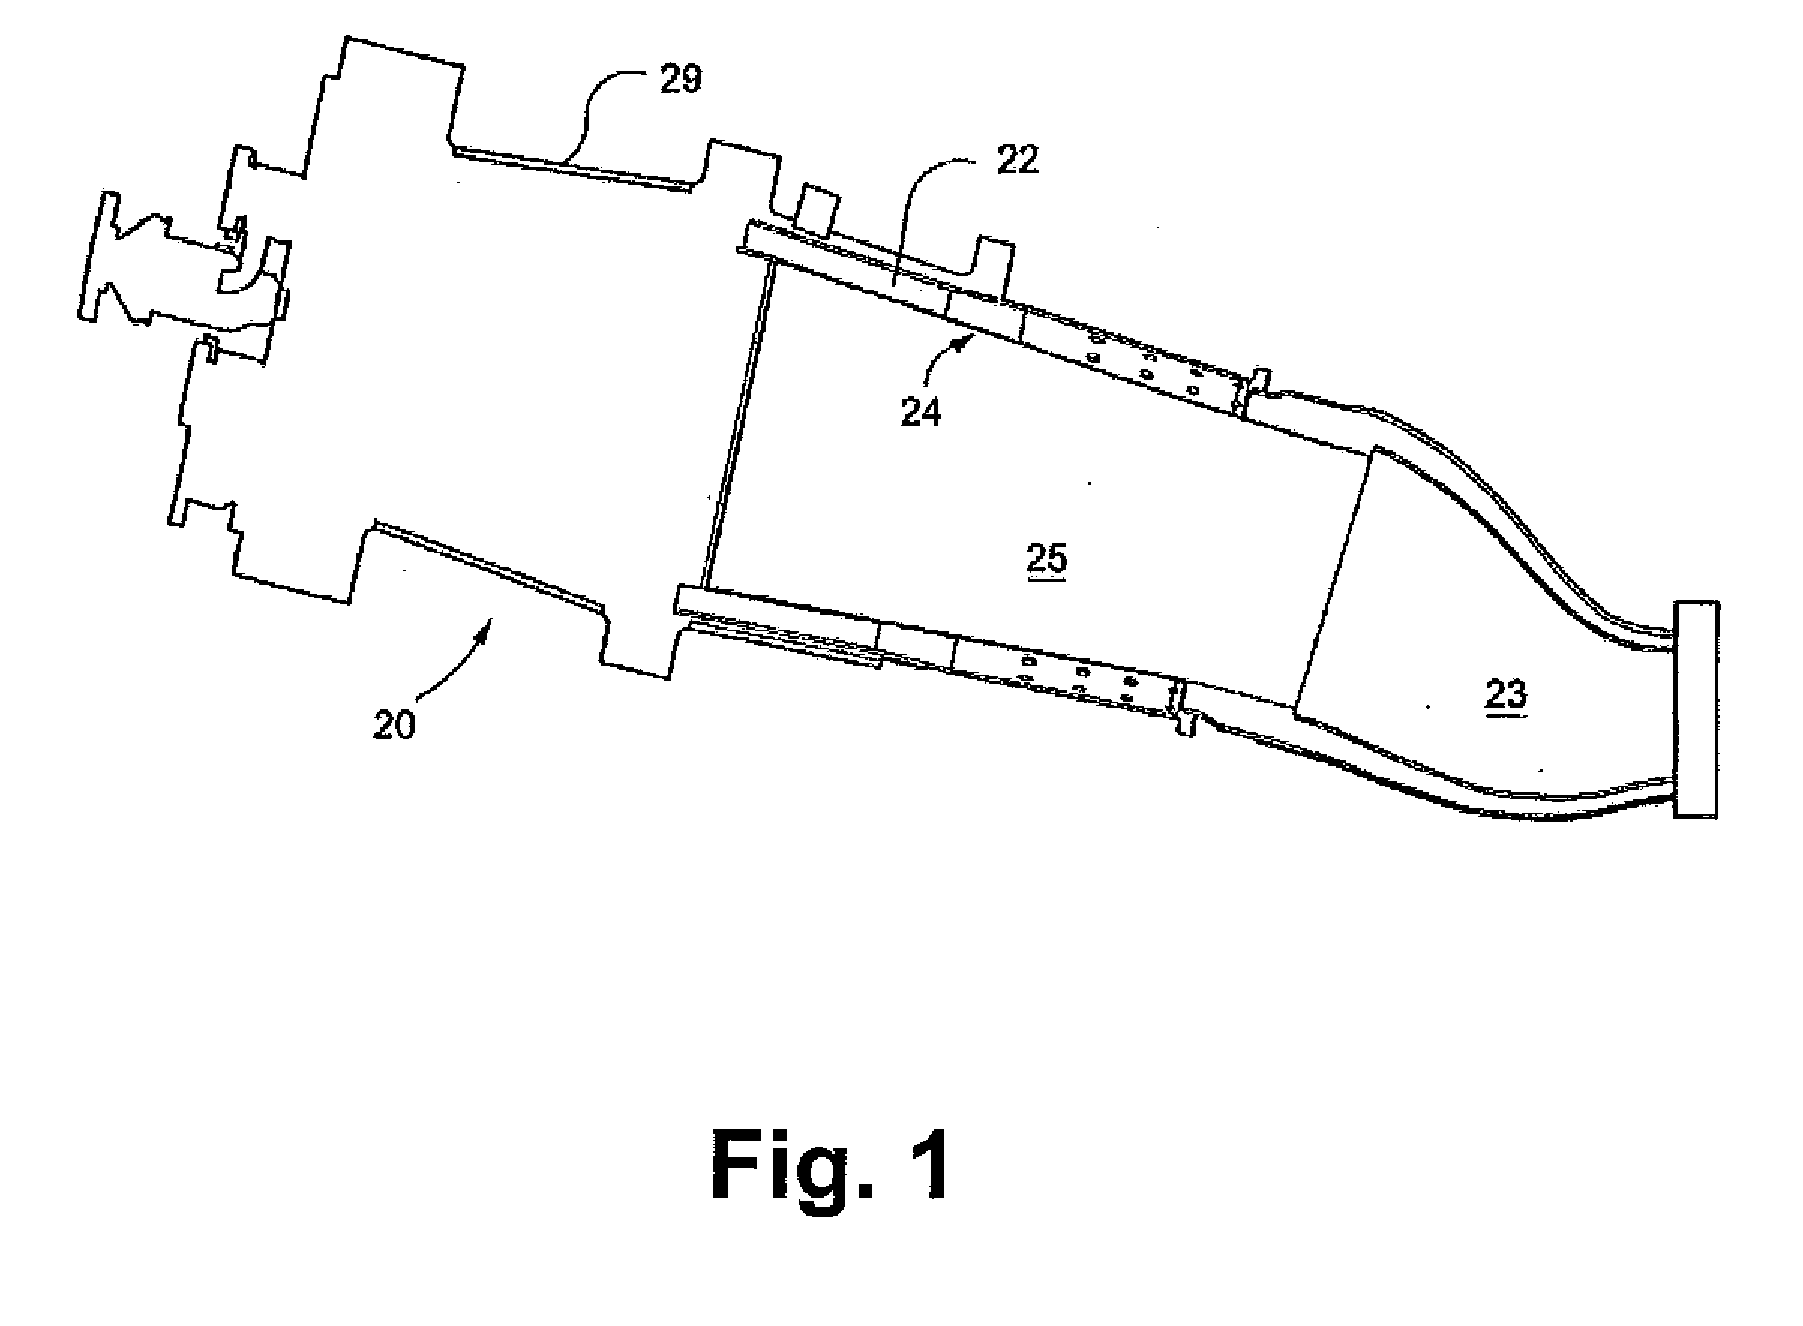 Method of depositing protective coatings on turbine combustion components